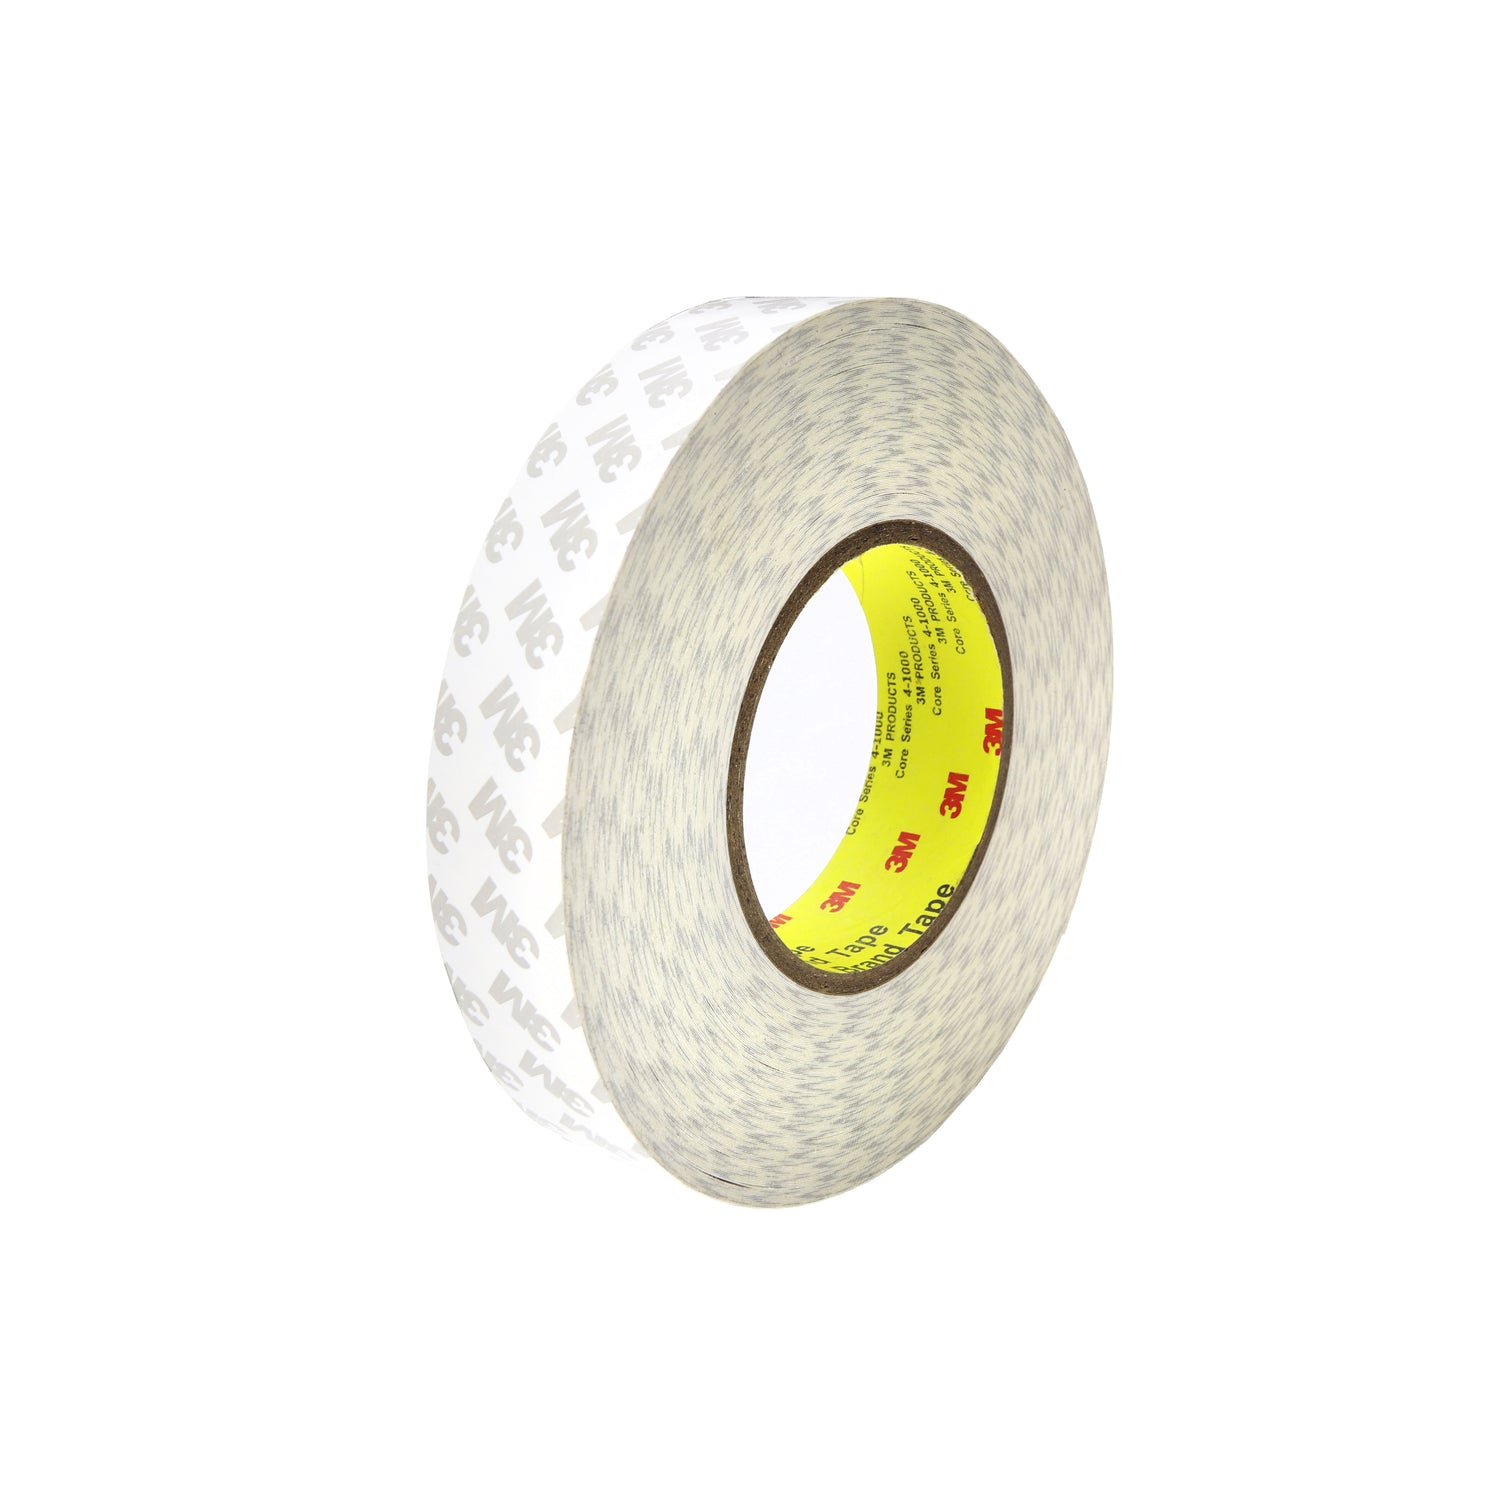 3M Double-Sided High-Adhesive Thin Tape 3M 超薄雙面高黏力膠紙